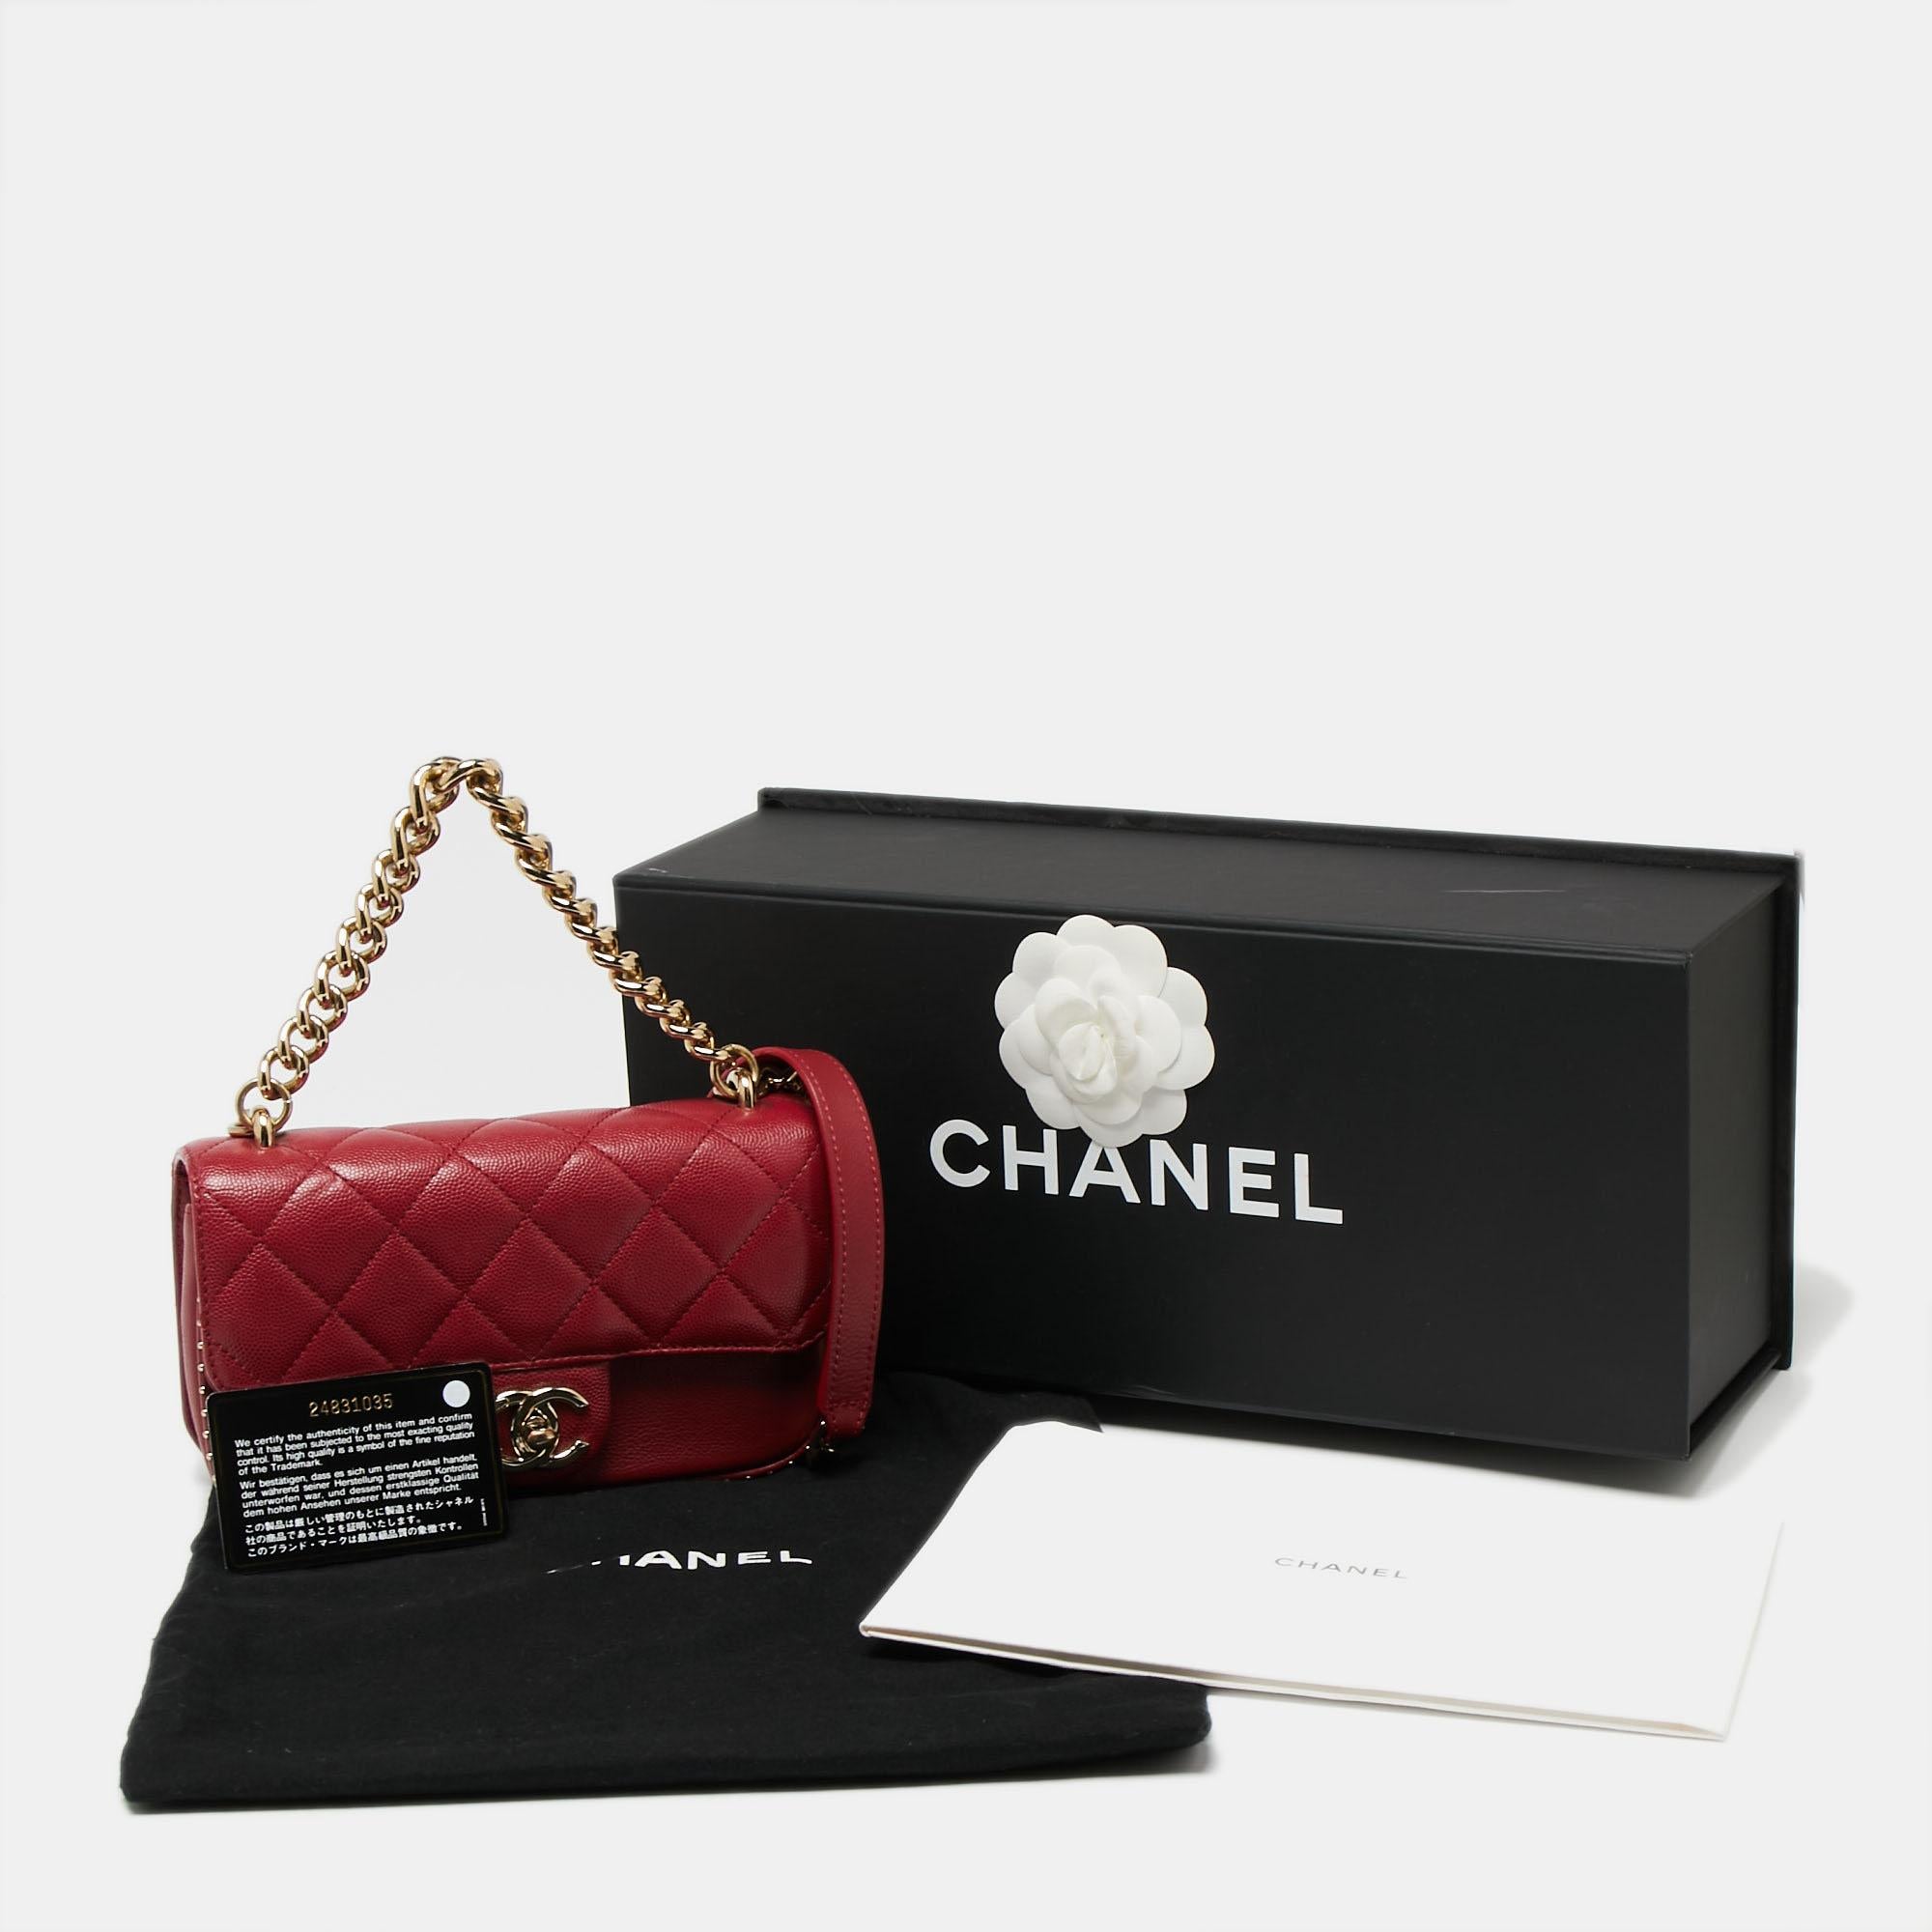 Chanel Cherry Red Caviar Quilted Leather Small Studded Flap Bag 8